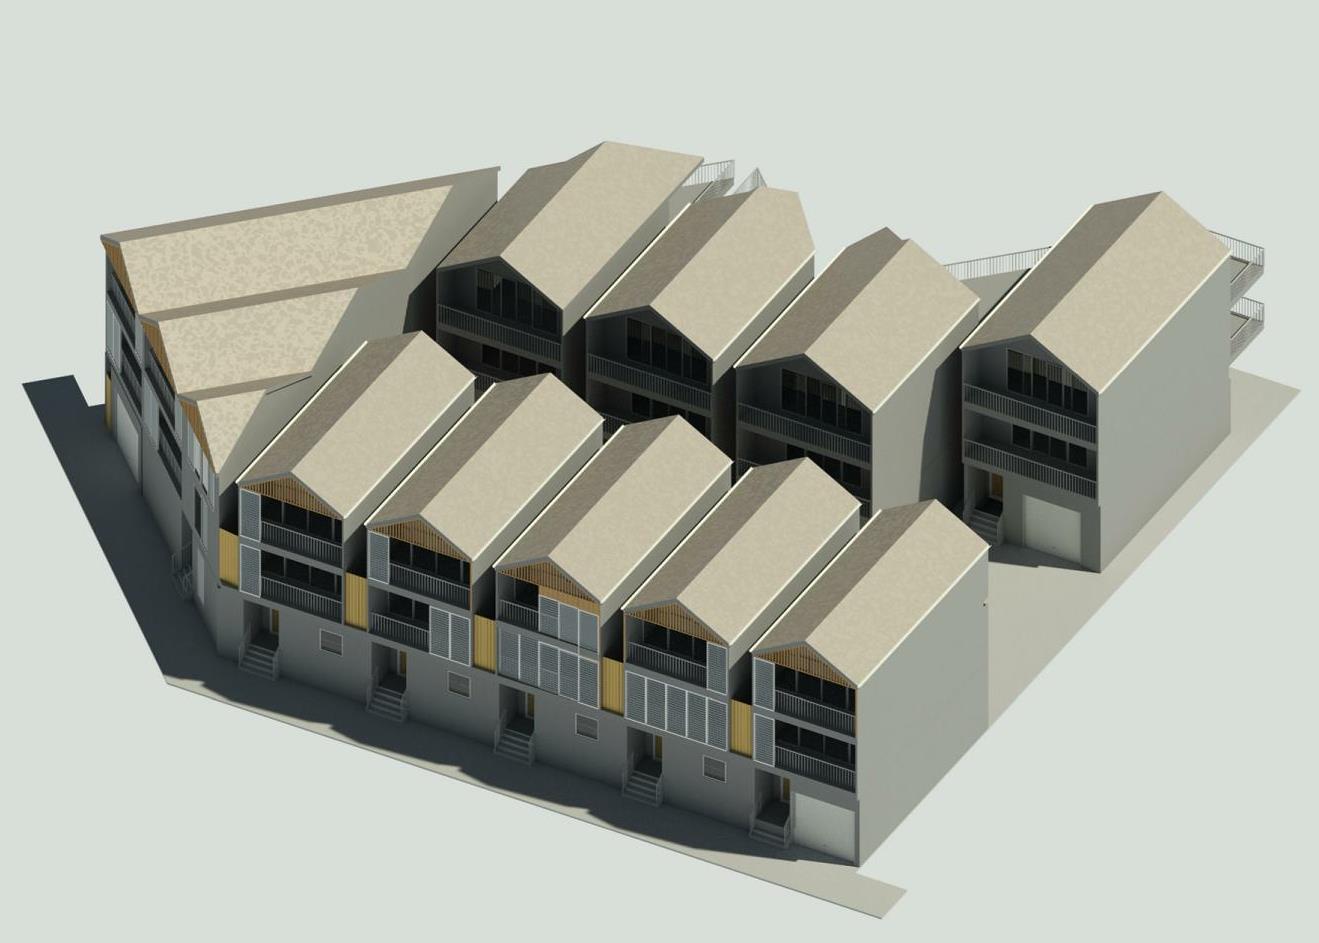 A conceptual design done for a commercial redevelopment for a well situated site in Whakatane’s busy township which would allow for up to 10 individual 3 story town houses.